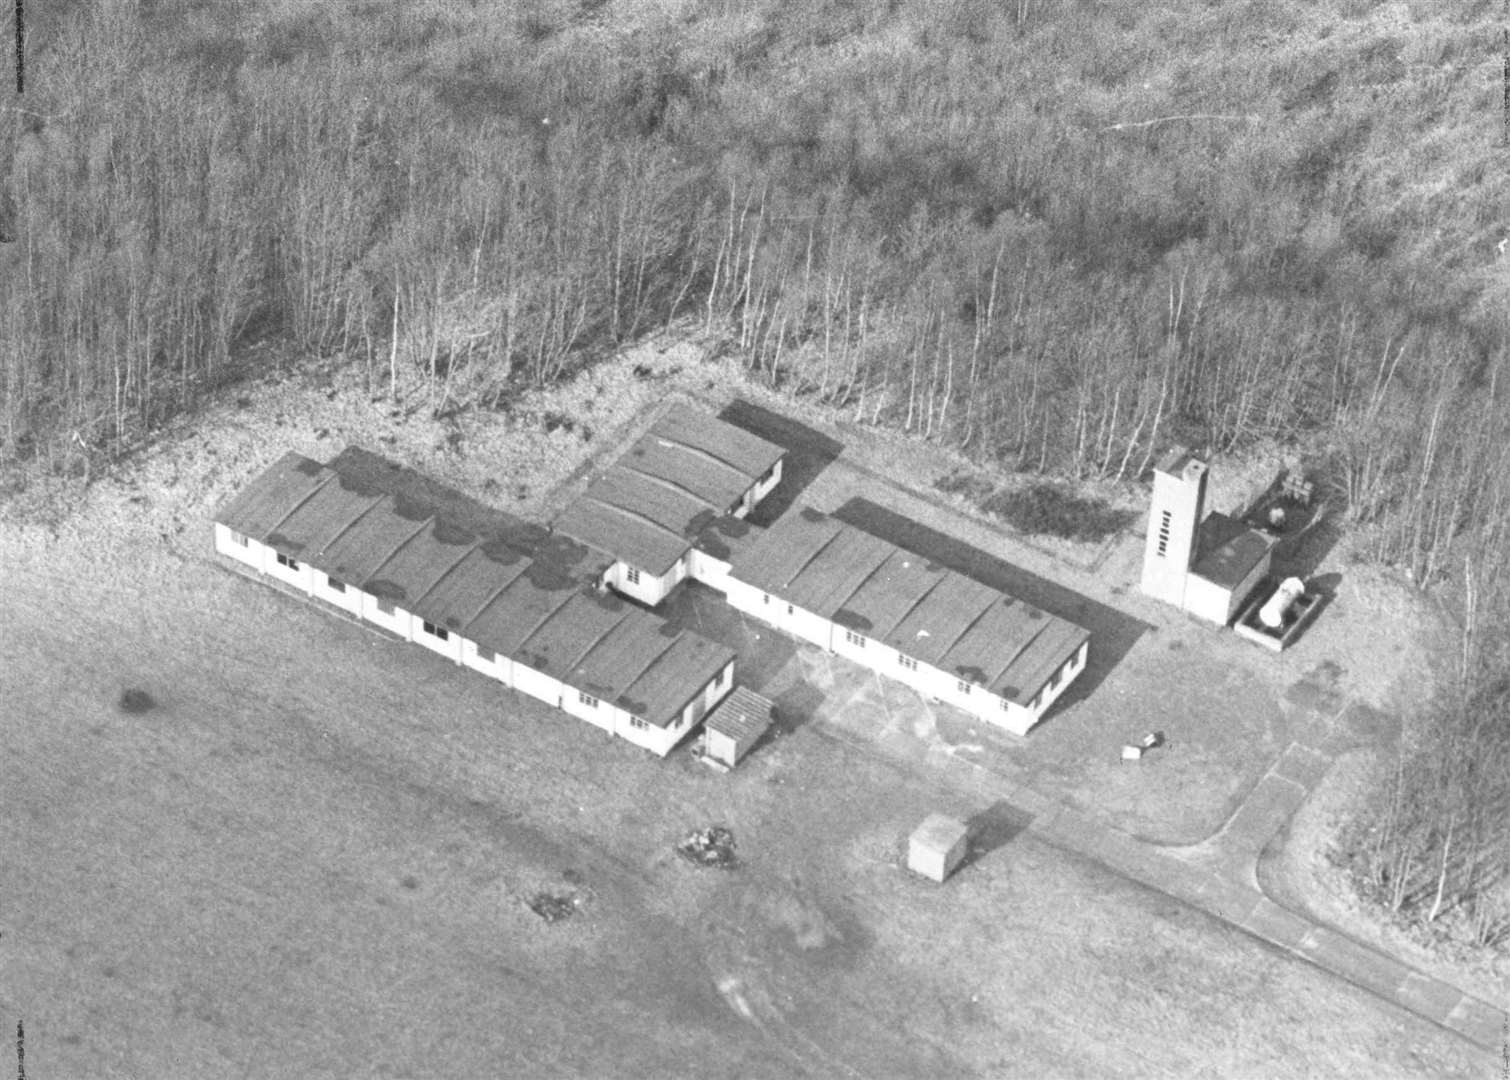 The gliding school at West Malling airfield, 1980